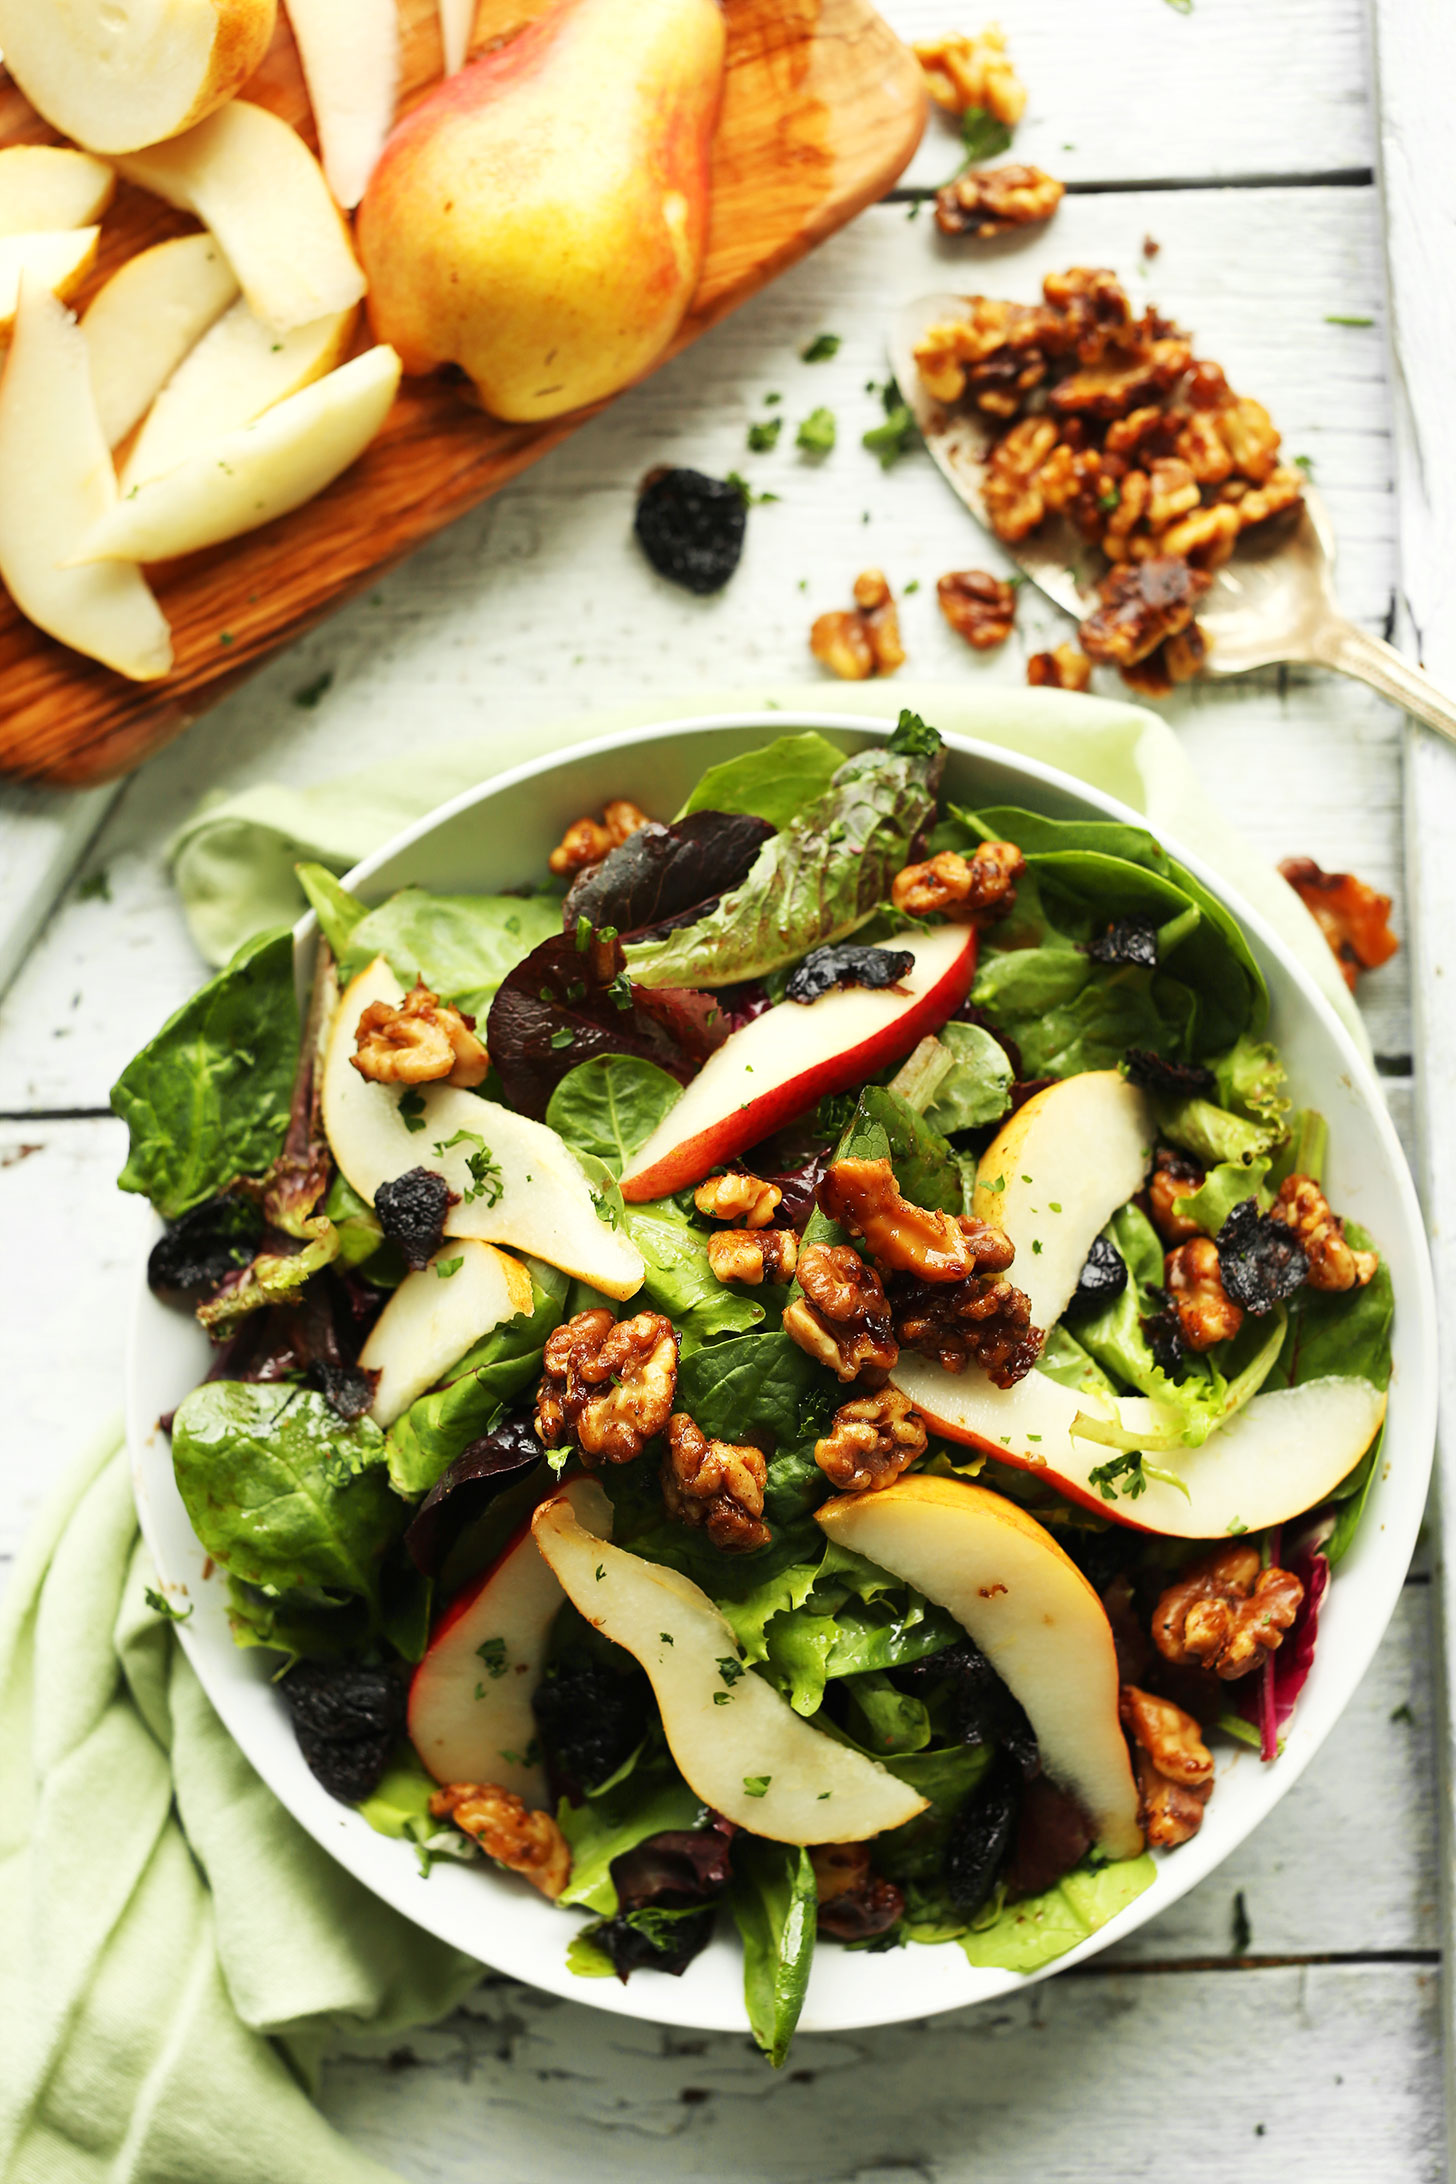 Big bowl of our sweet and flavorful Pear Salad with Dried Cherries and Candied Walnuts